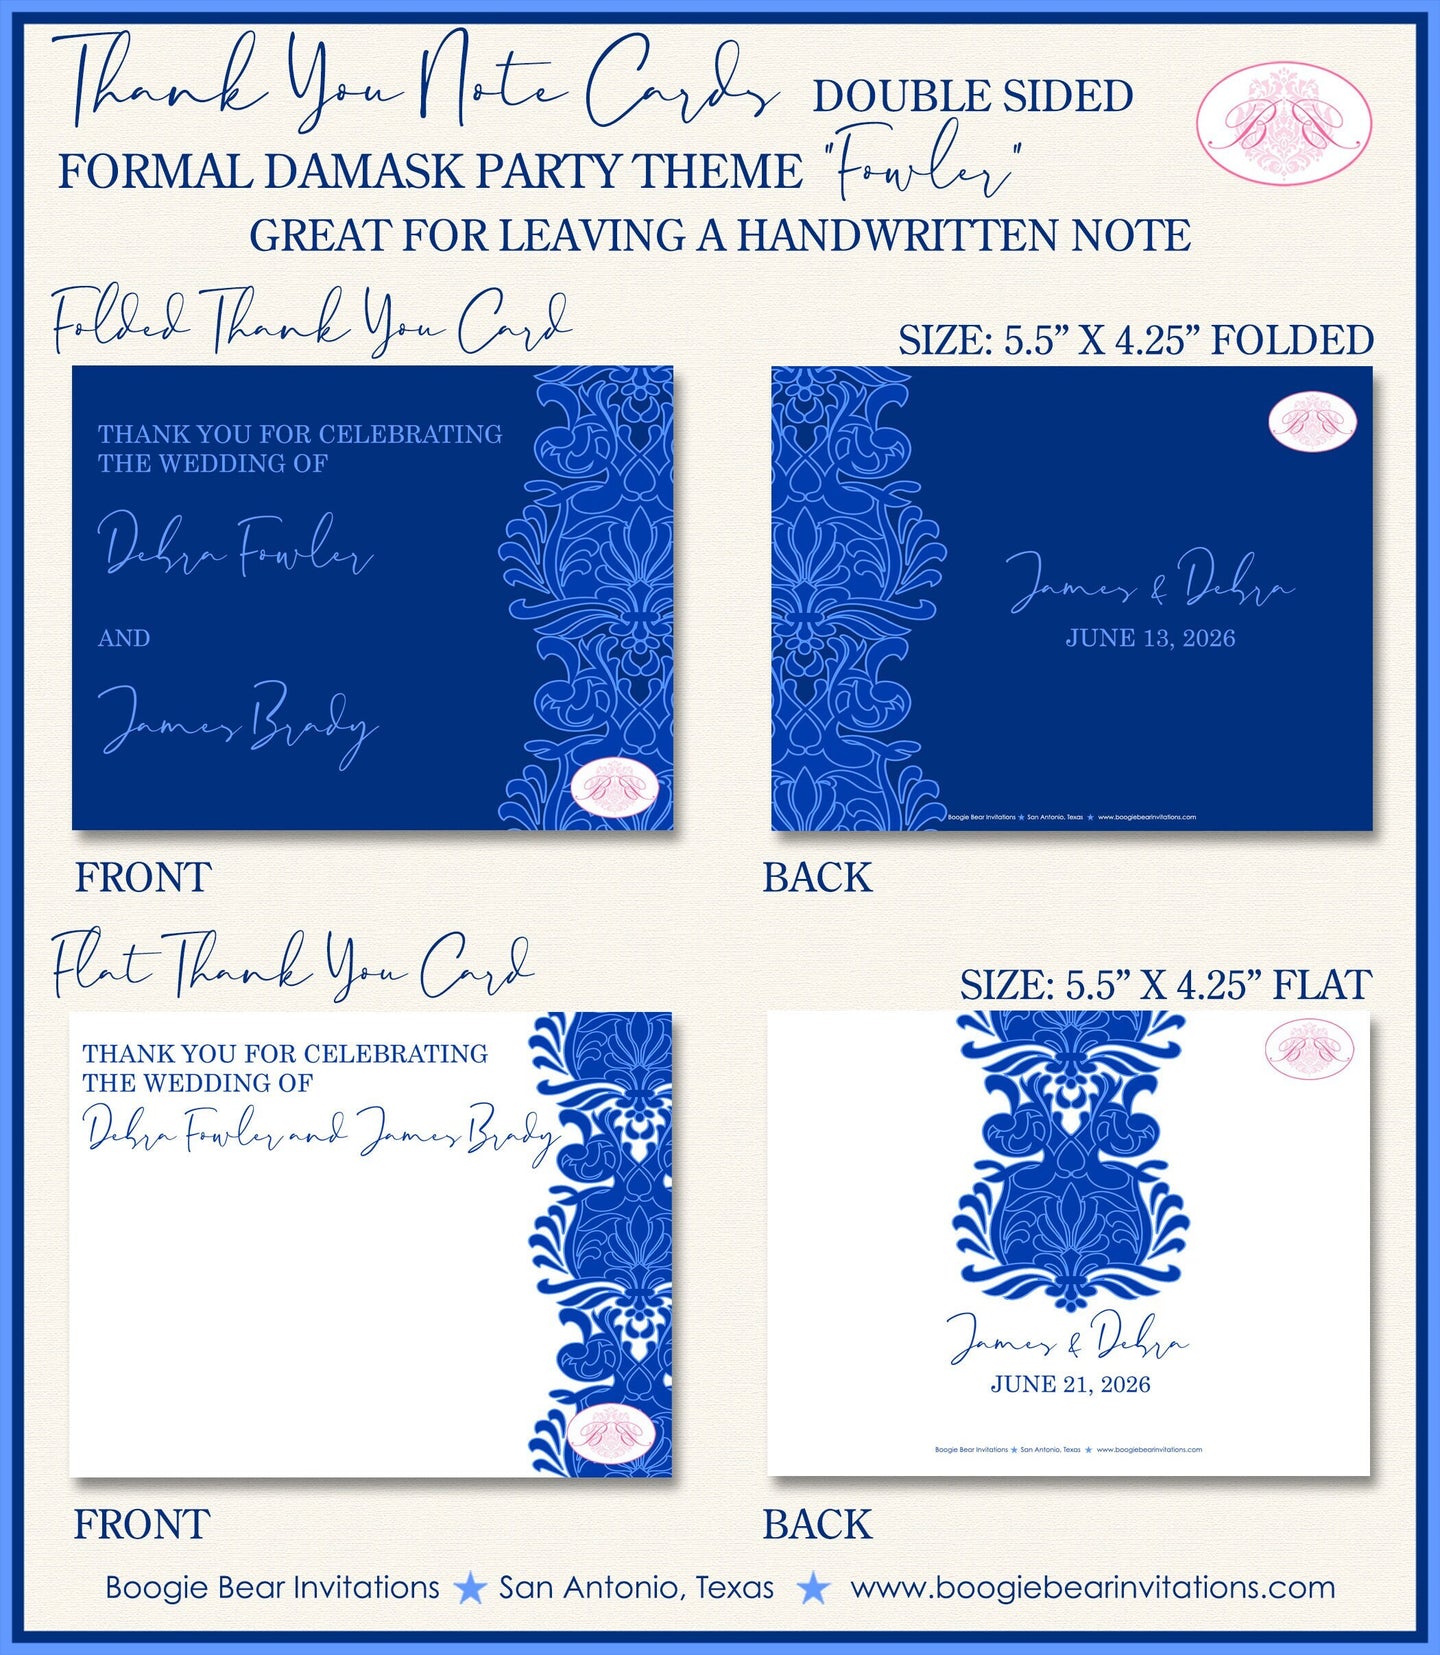 Formal Damask Thank You Card Wedding Party Blue Flower Lotus Victorian Castle Ball Navy Royal Boogie Bear Invitations Fowler Theme Printed